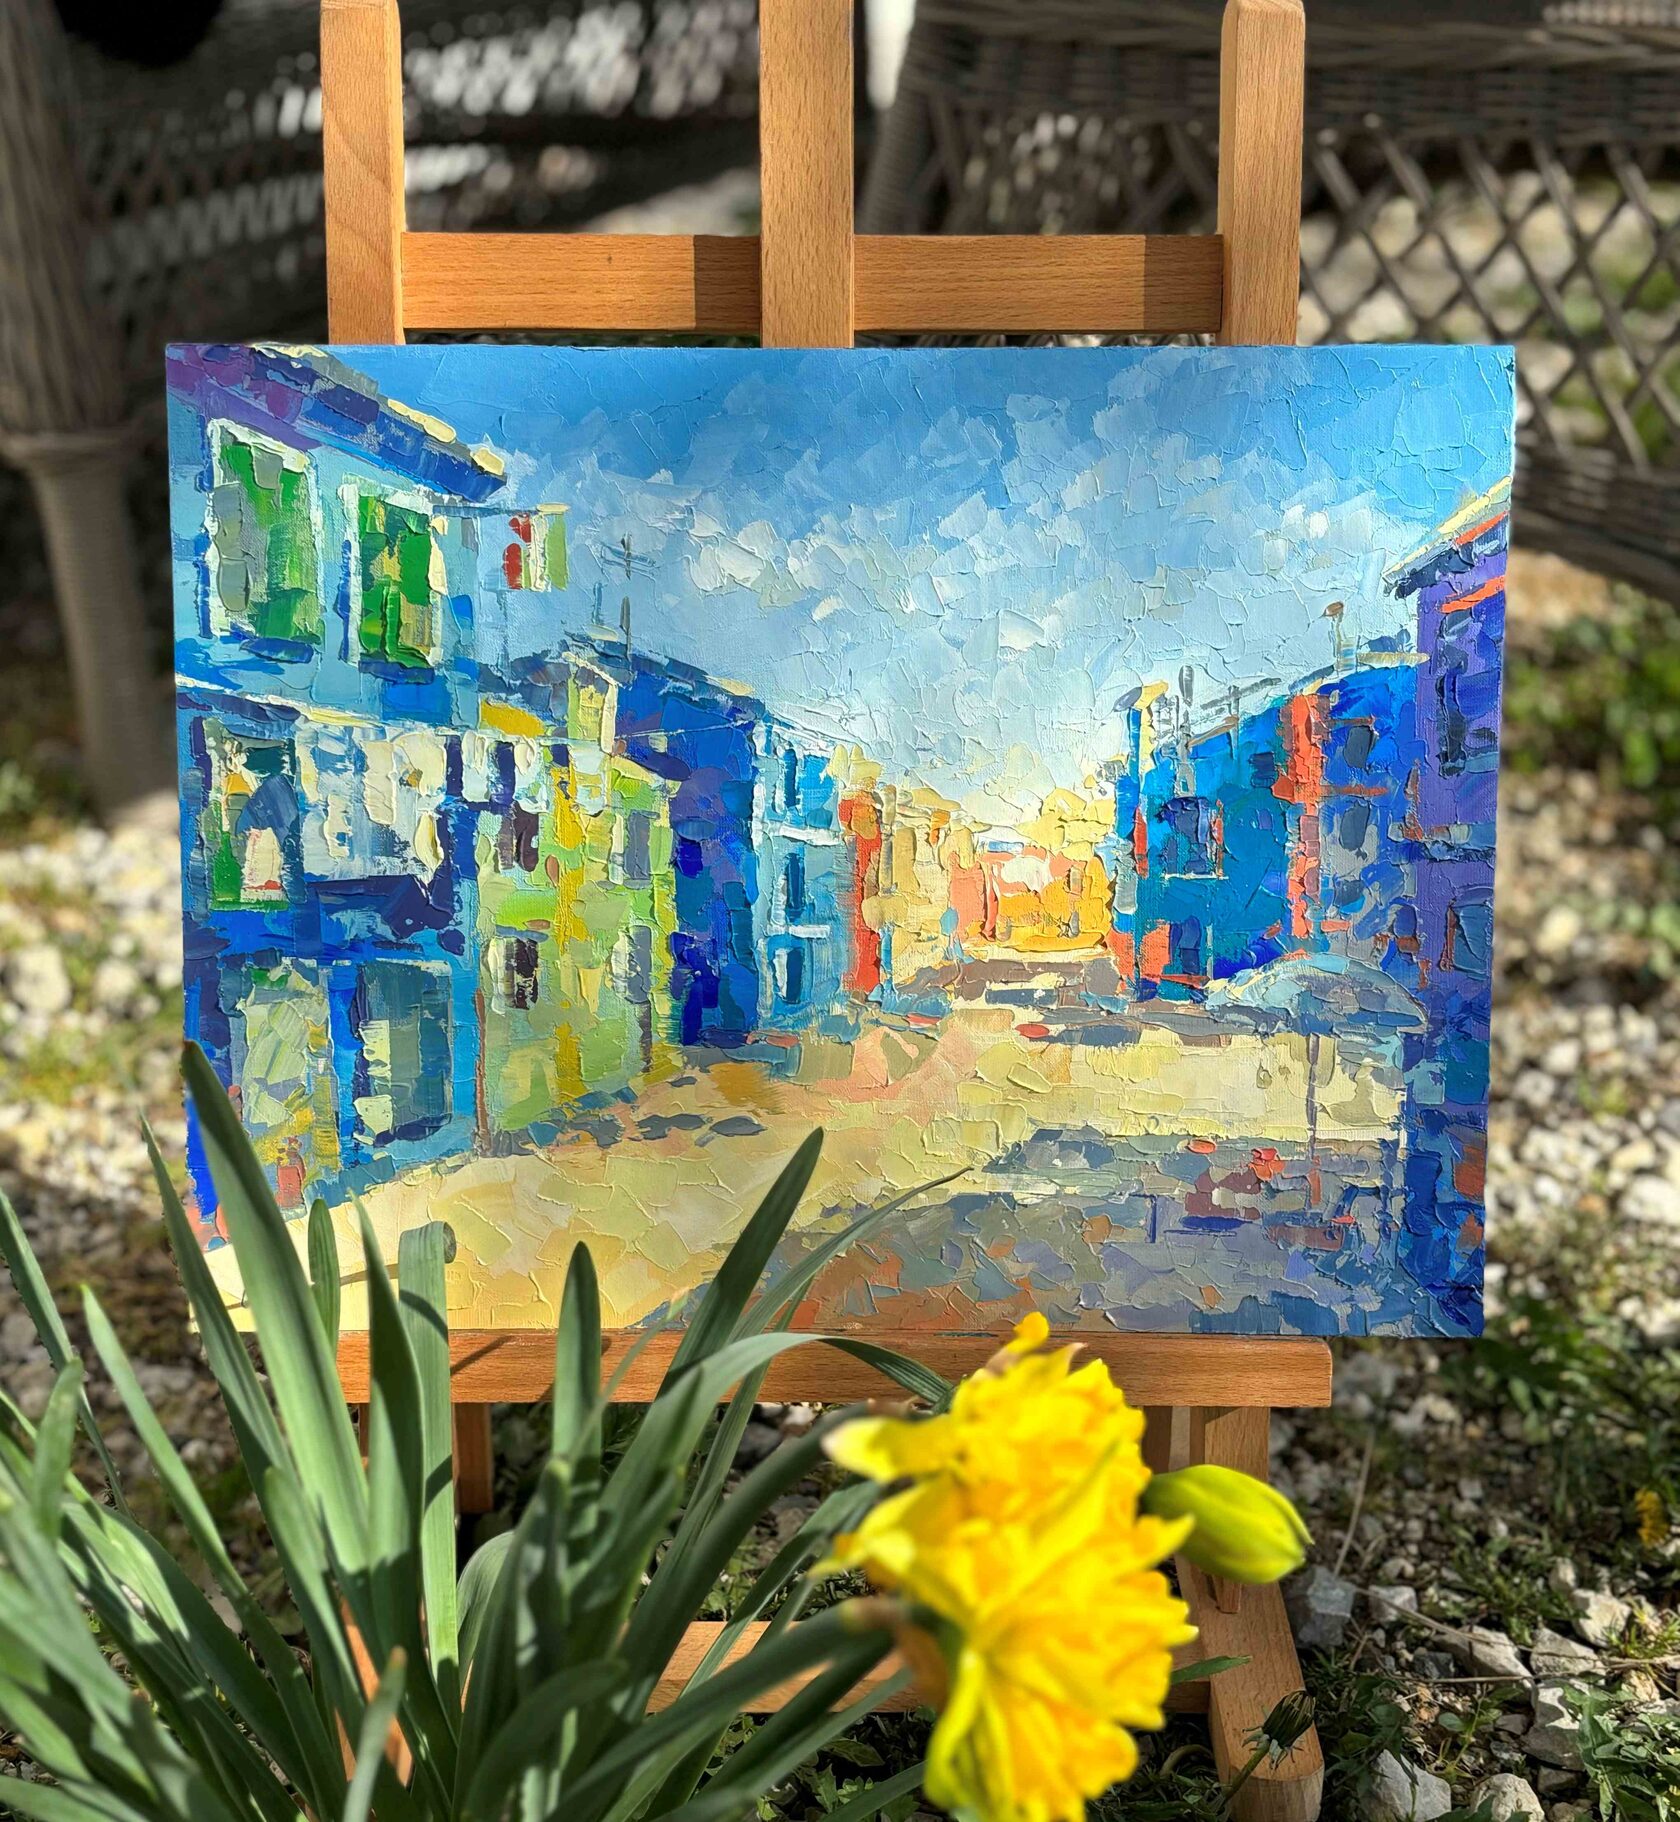 Venice oil painting, Italian landscape abstract art, Colored houses of Burano island knife painting, artist OXYPOINT Oxana Kravtsova, painting for sale 